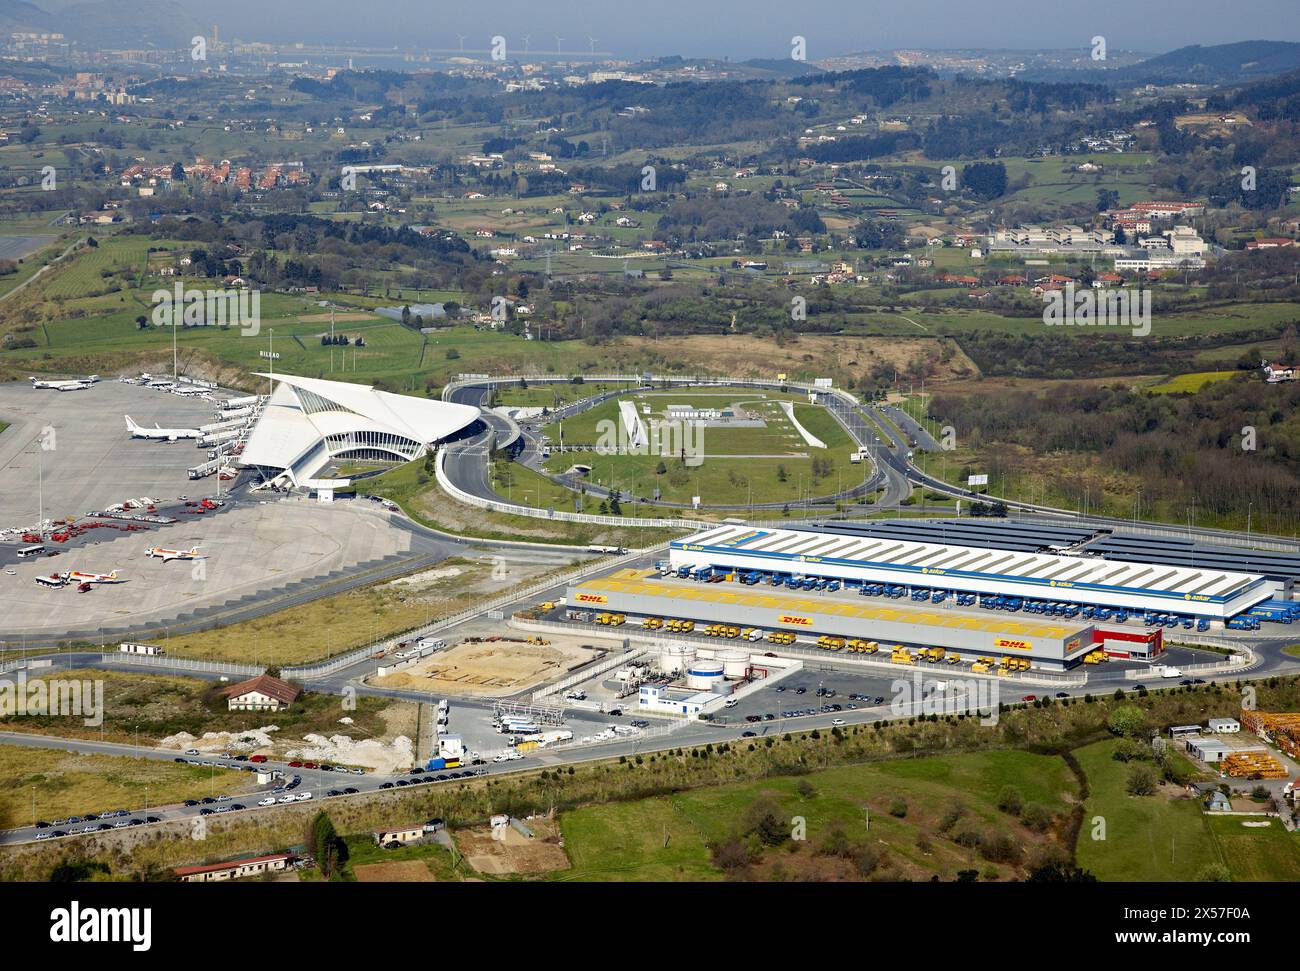 Bilbao Airport, Loiu, Biscay, Basque country, Spain Stock Photo